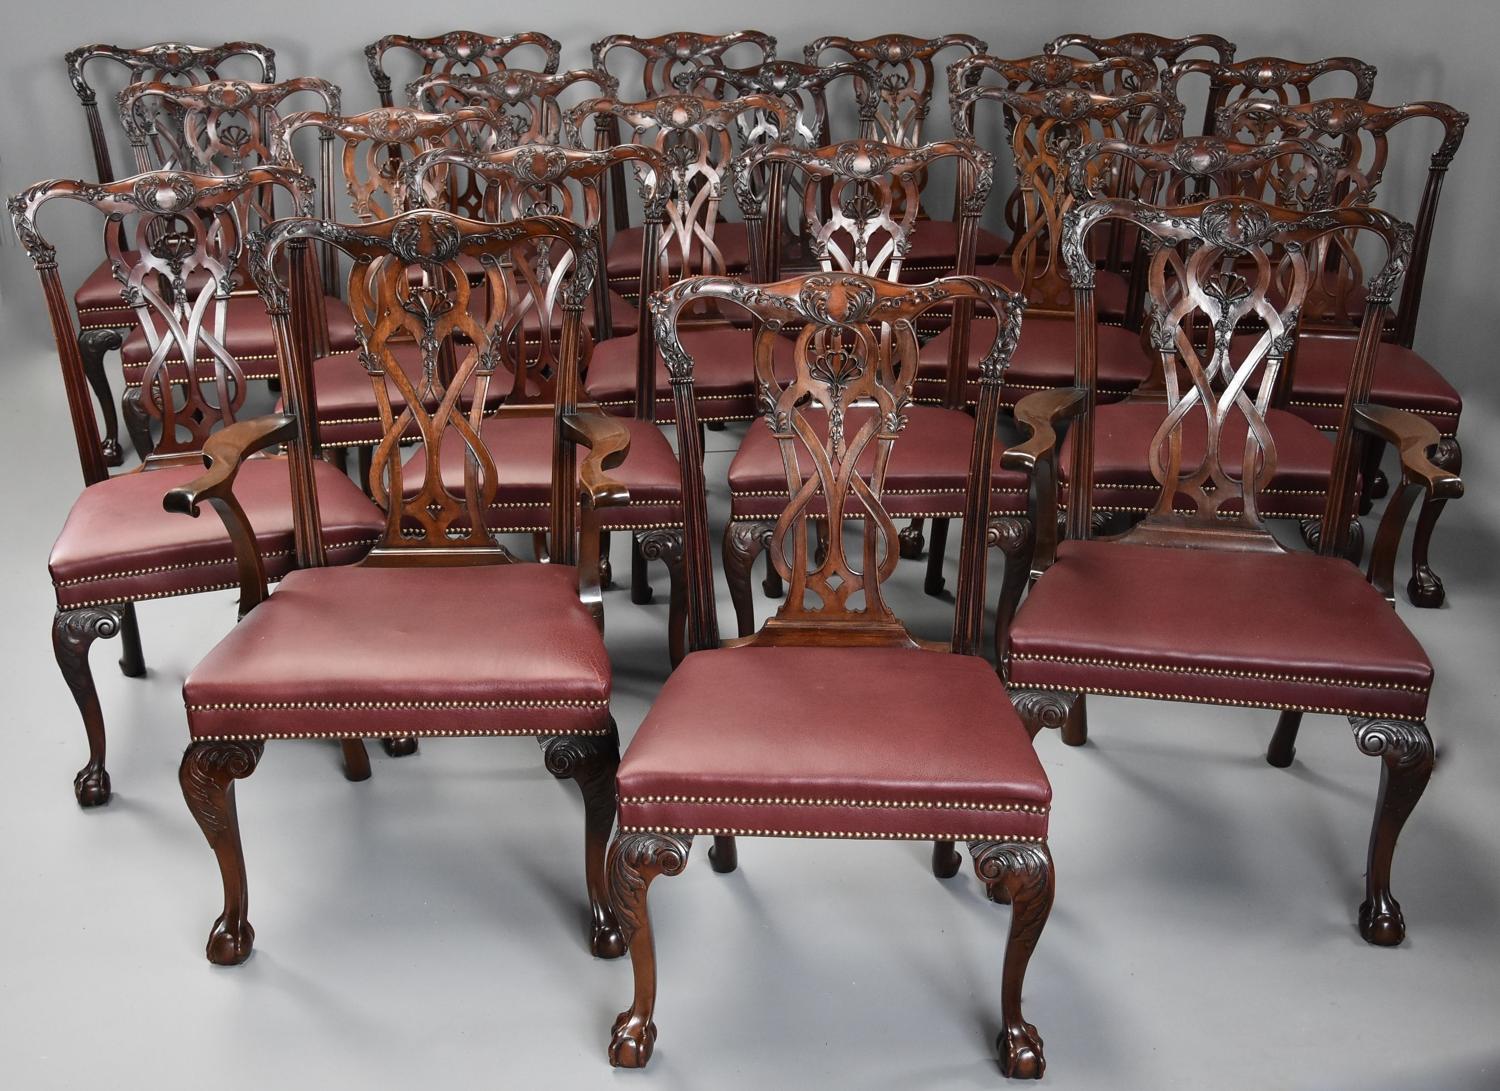 Superb set of twenty one Chippendale style mahogany dining chairs